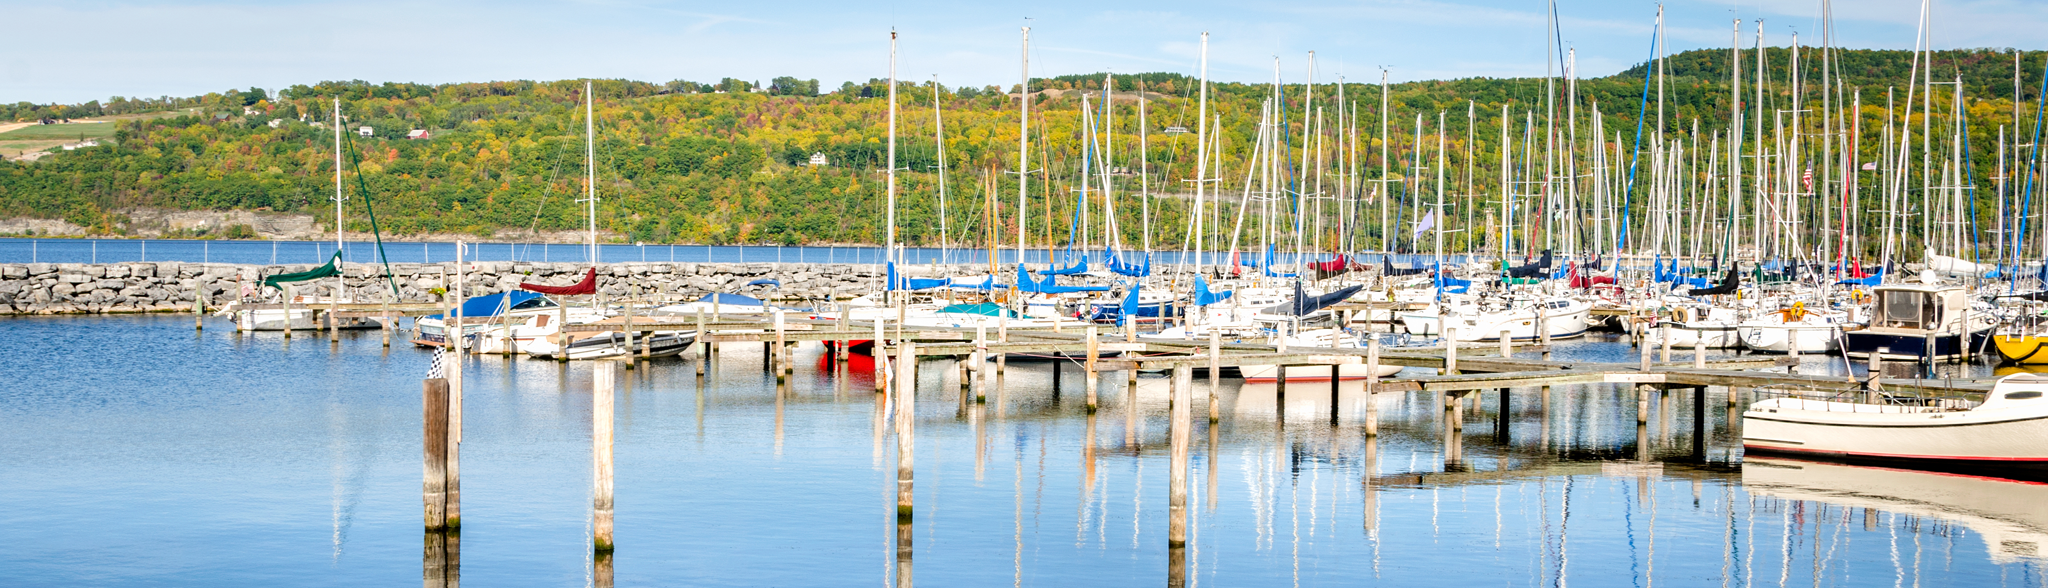 Things to do in the Finger Lakes